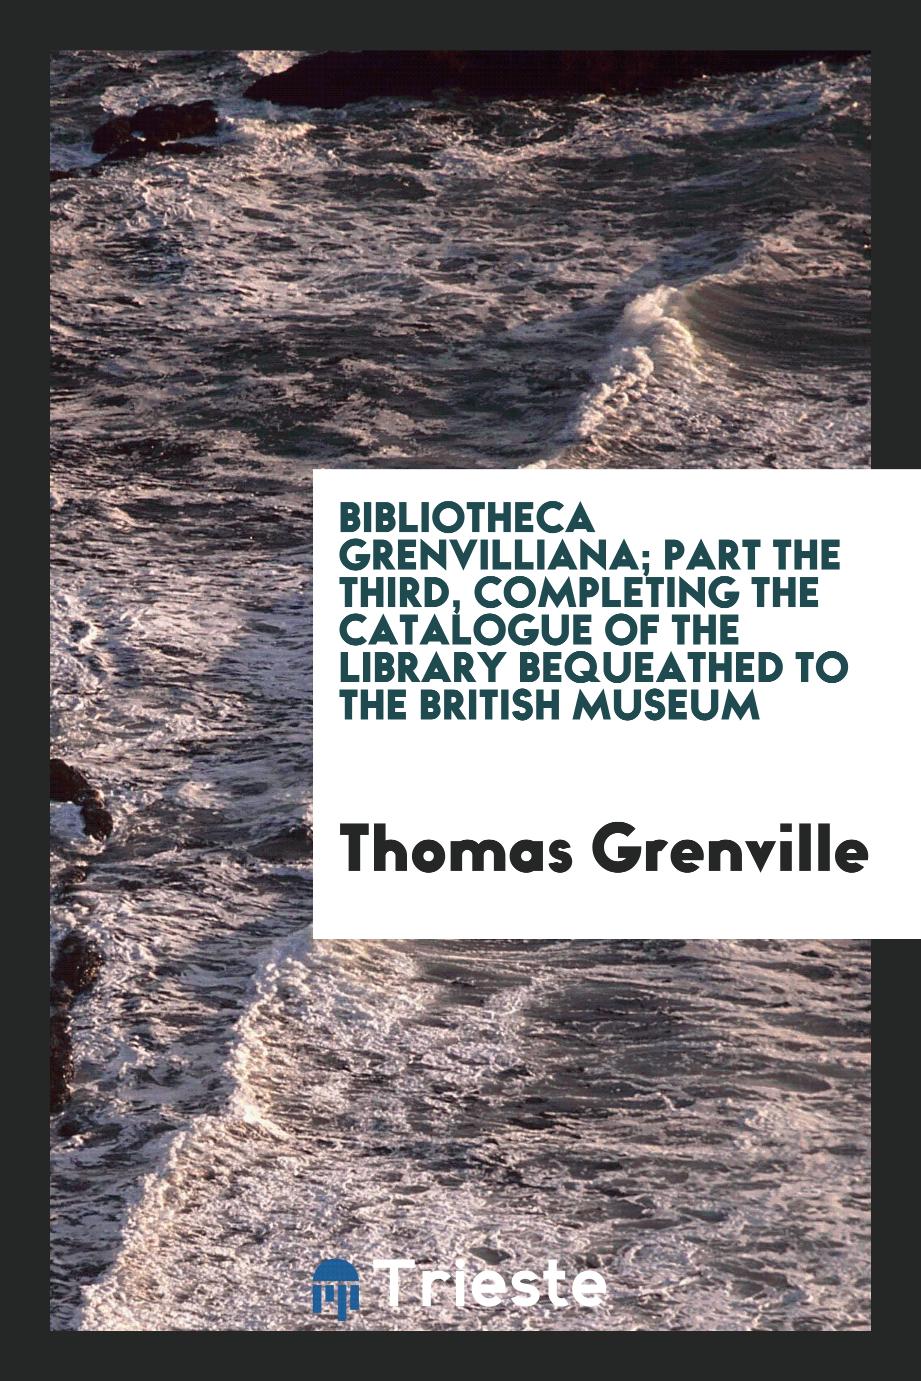 Bibliotheca Grenvilliana; part the third, completing the catalogue of the library bequeathed to the British museum